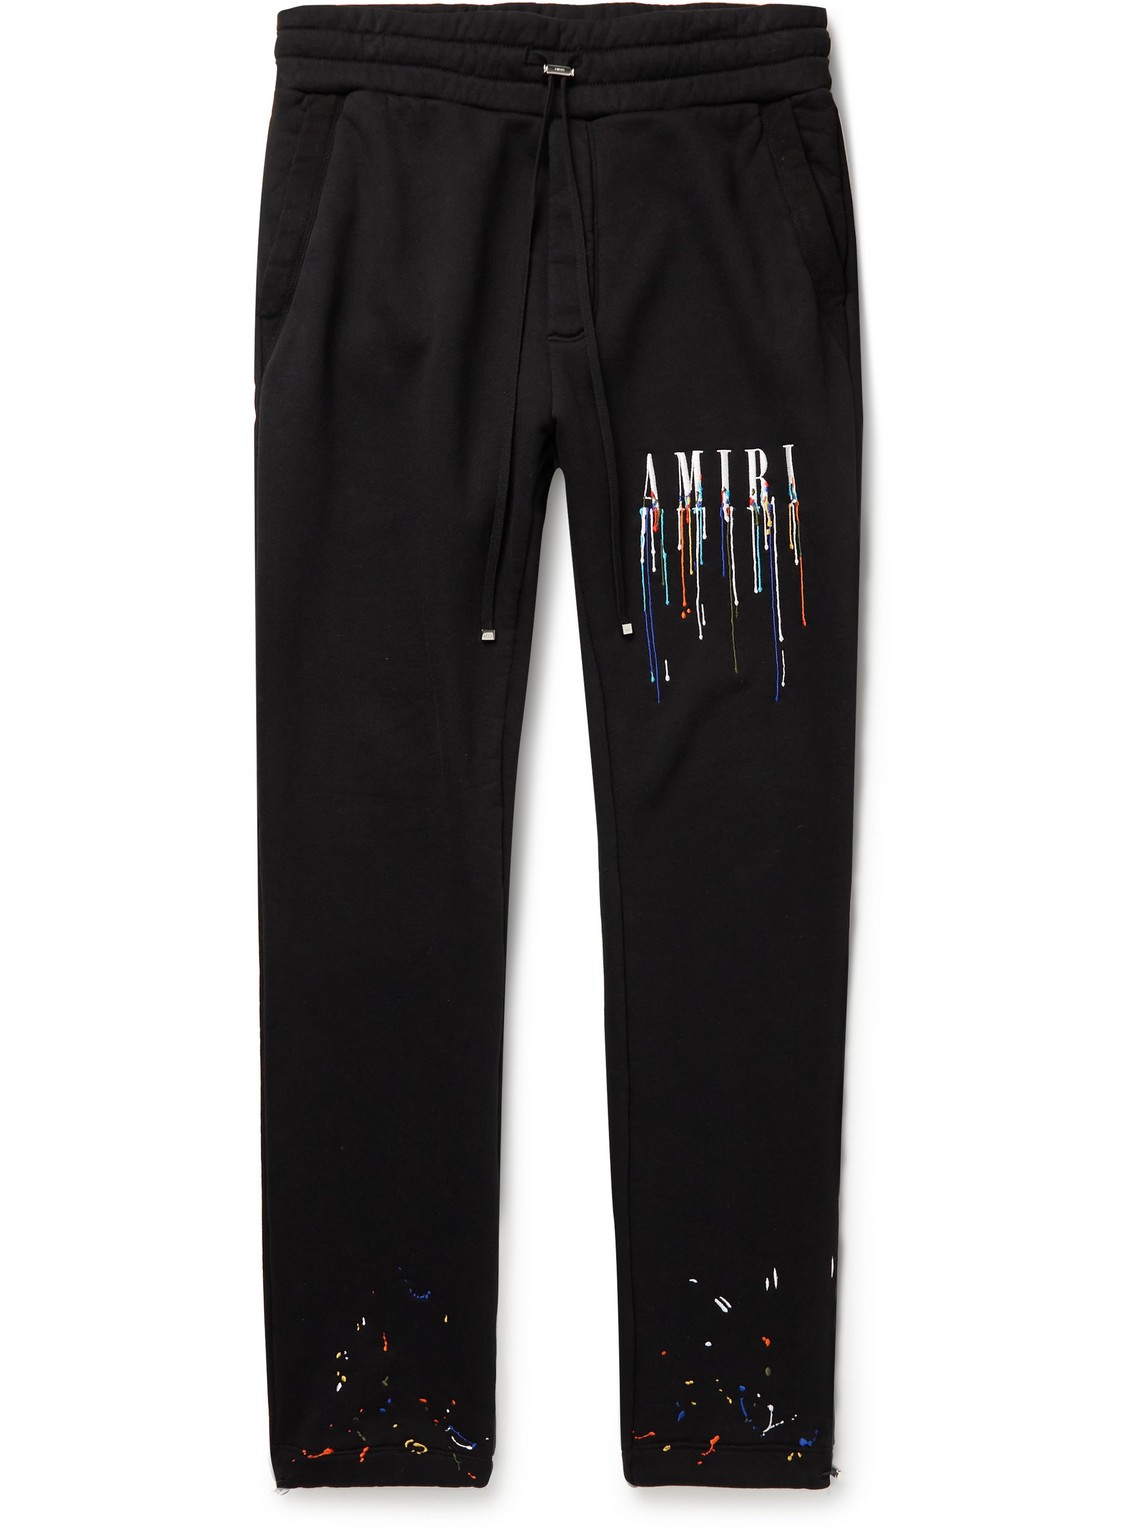 Tapered Logo-Embroidered Cotton-Jersey Sweatpants